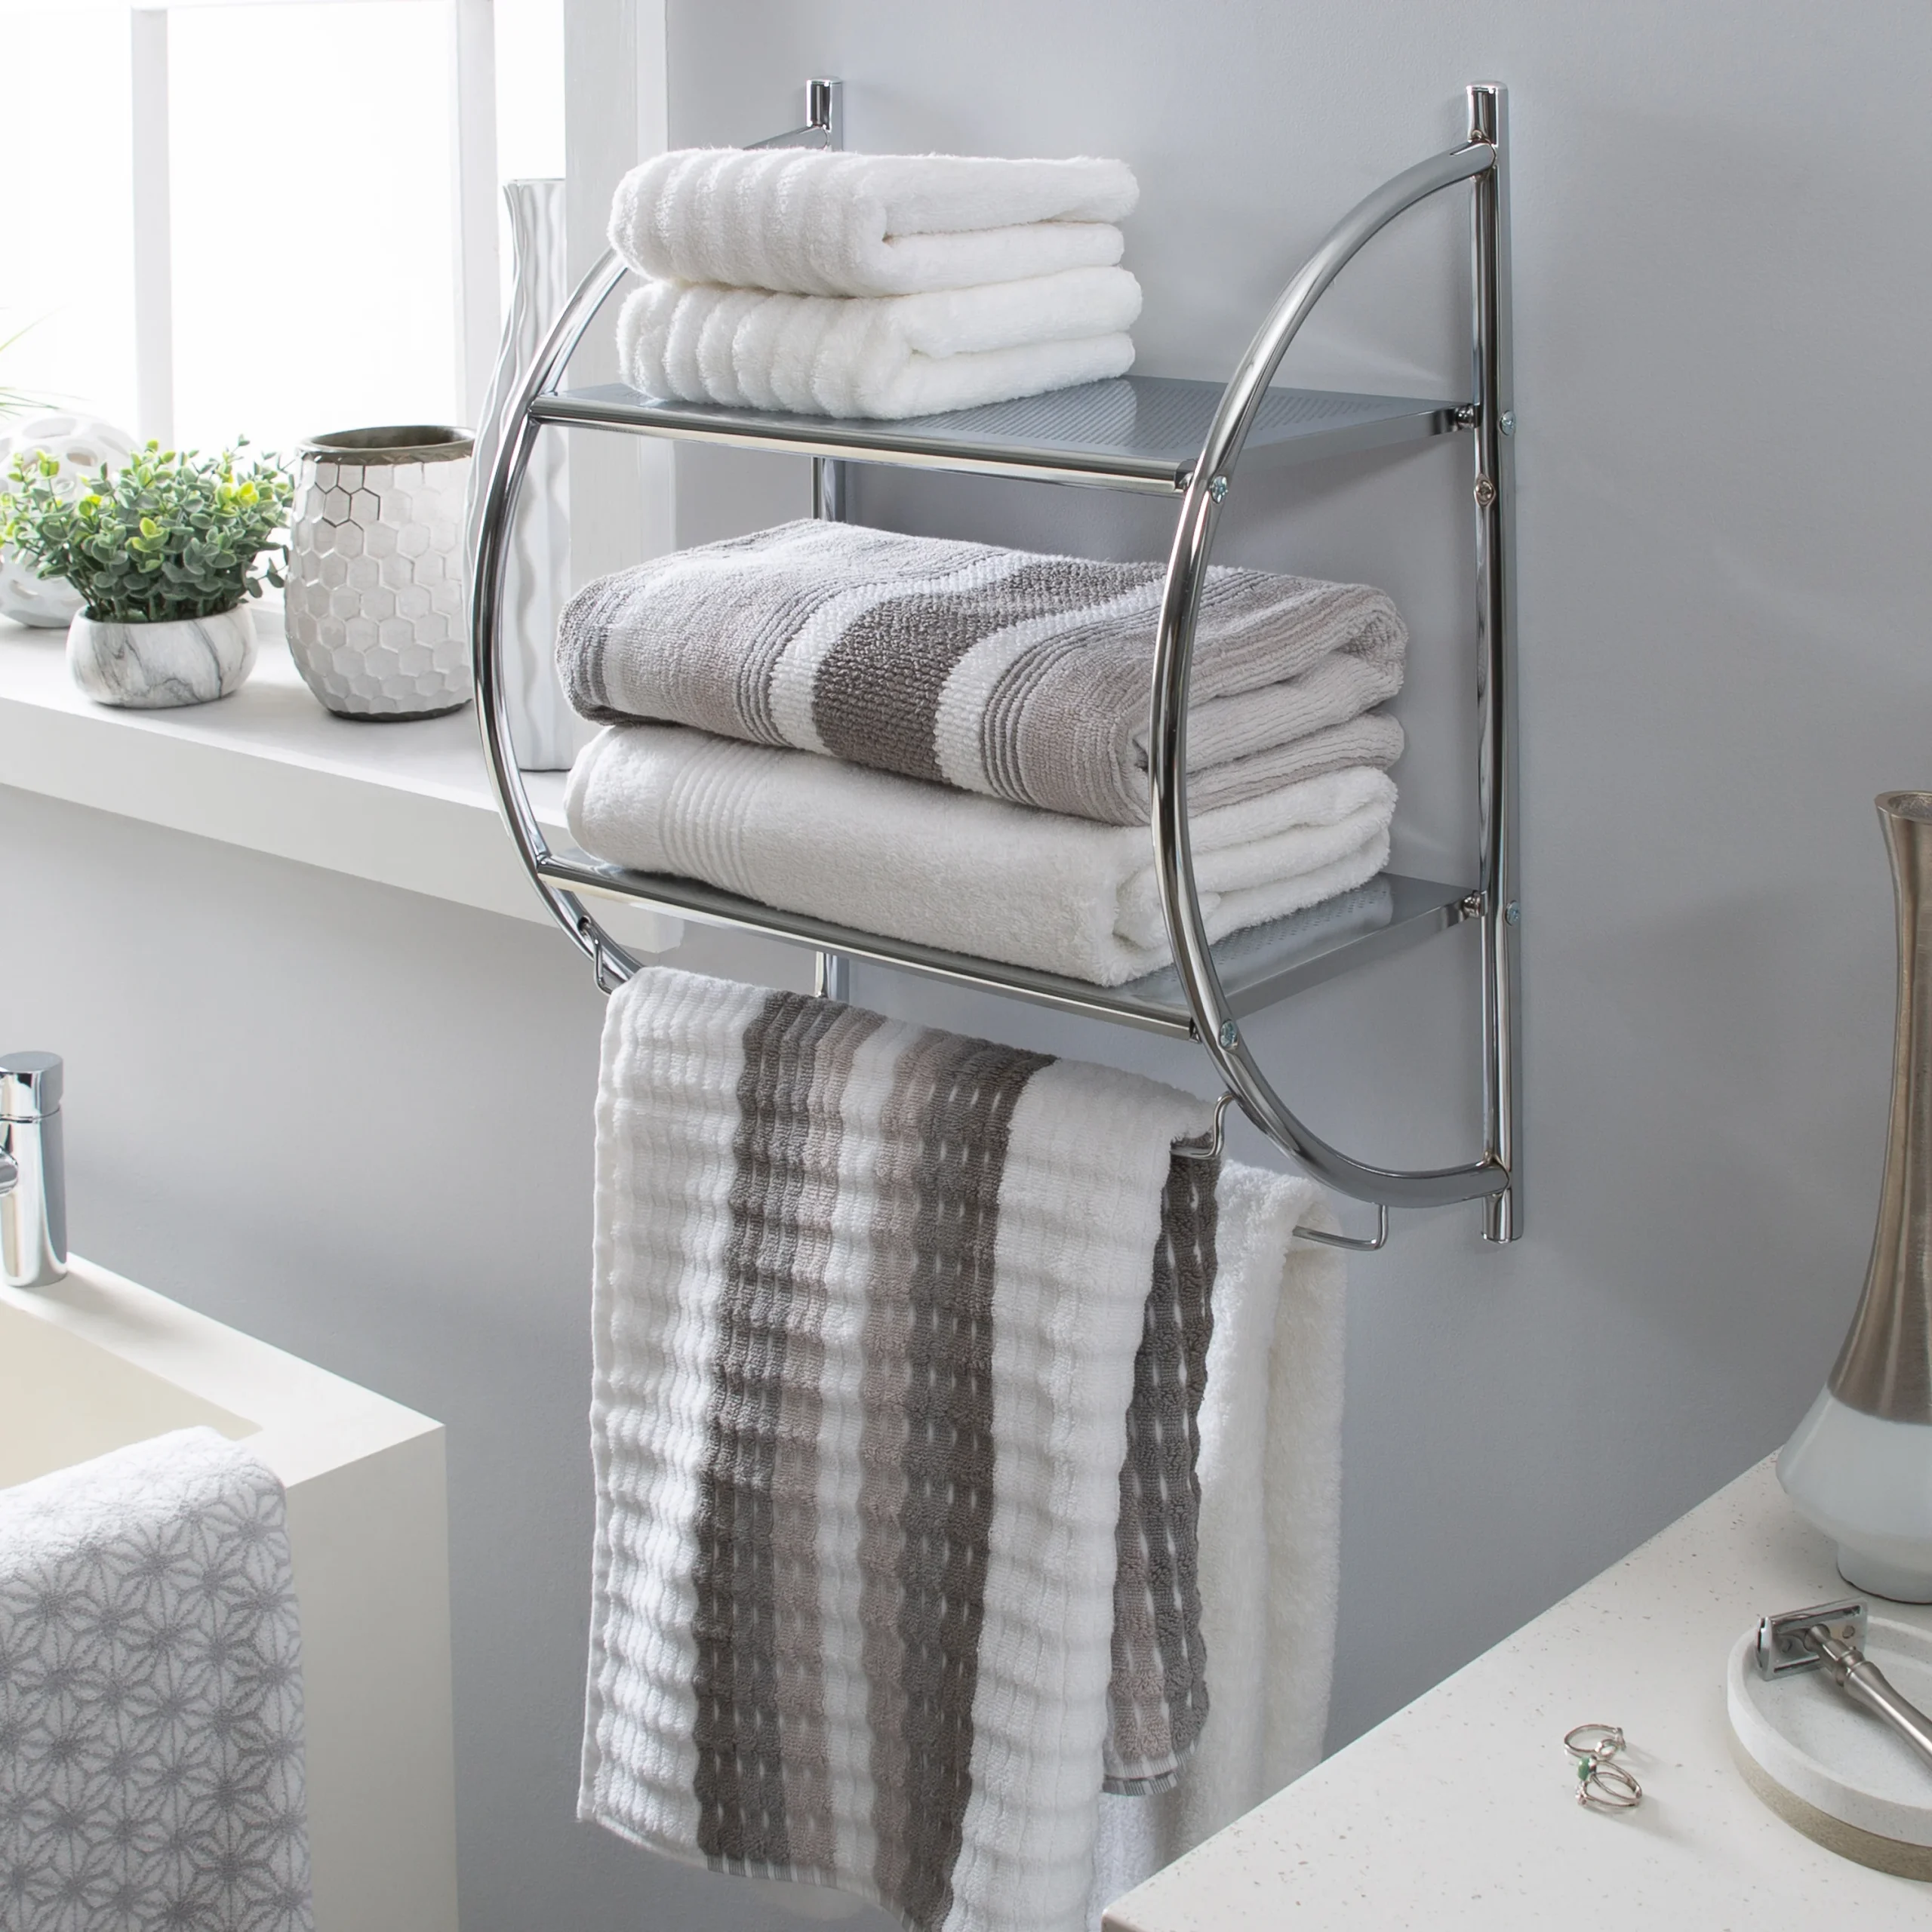 where-should-a-towel-bar-be-placed